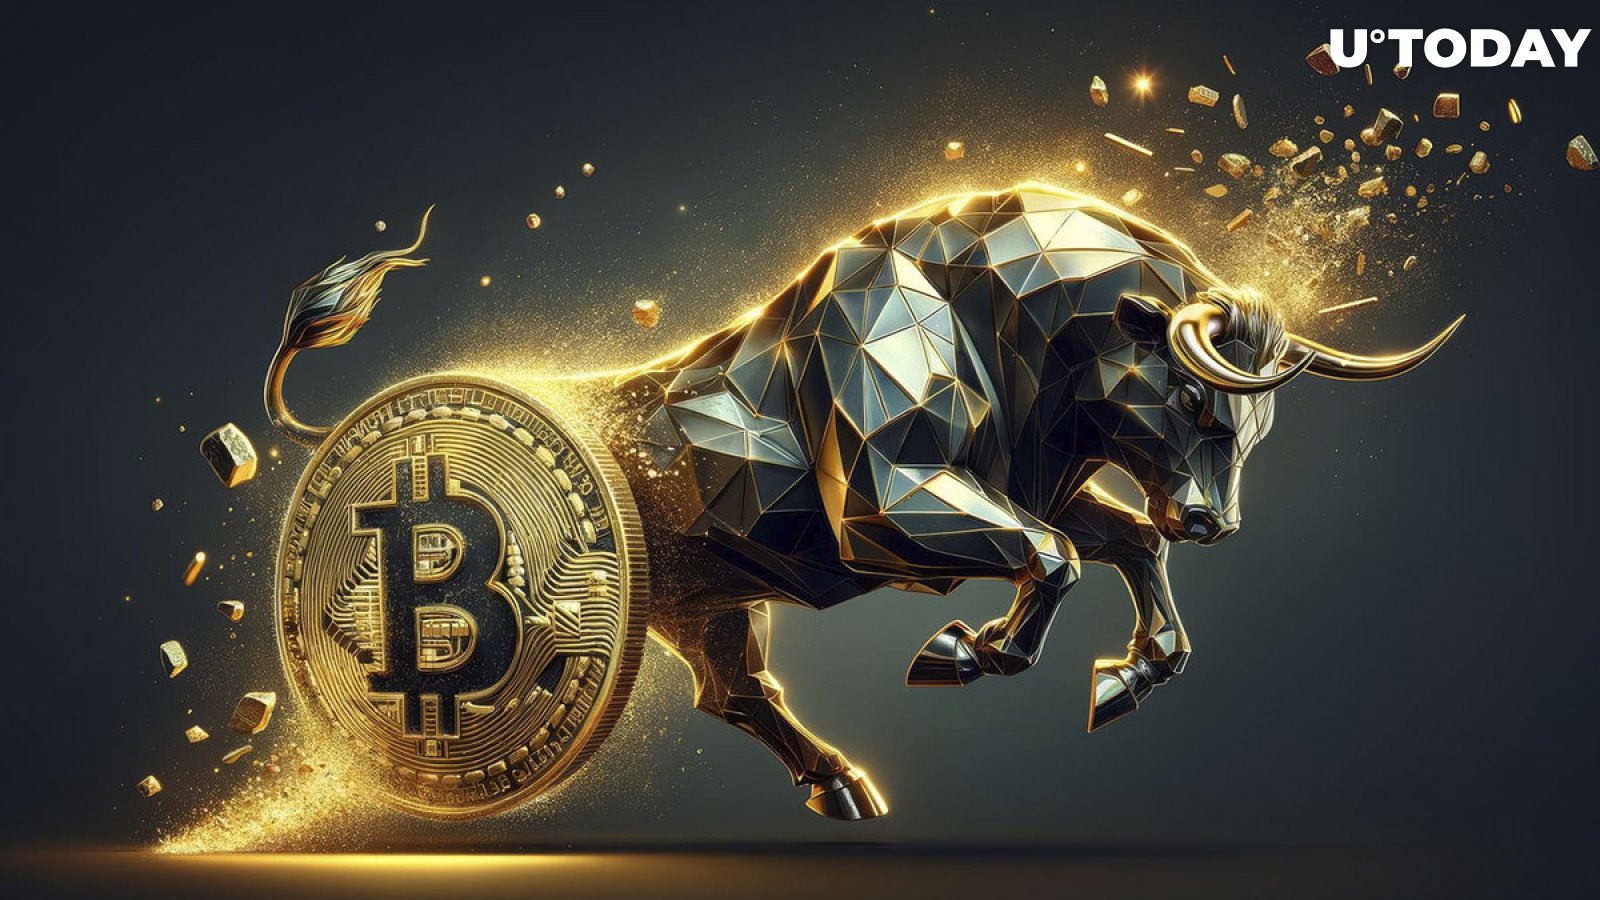 Bitcoin's Price History Points to Bull Run in 120 Days at Most